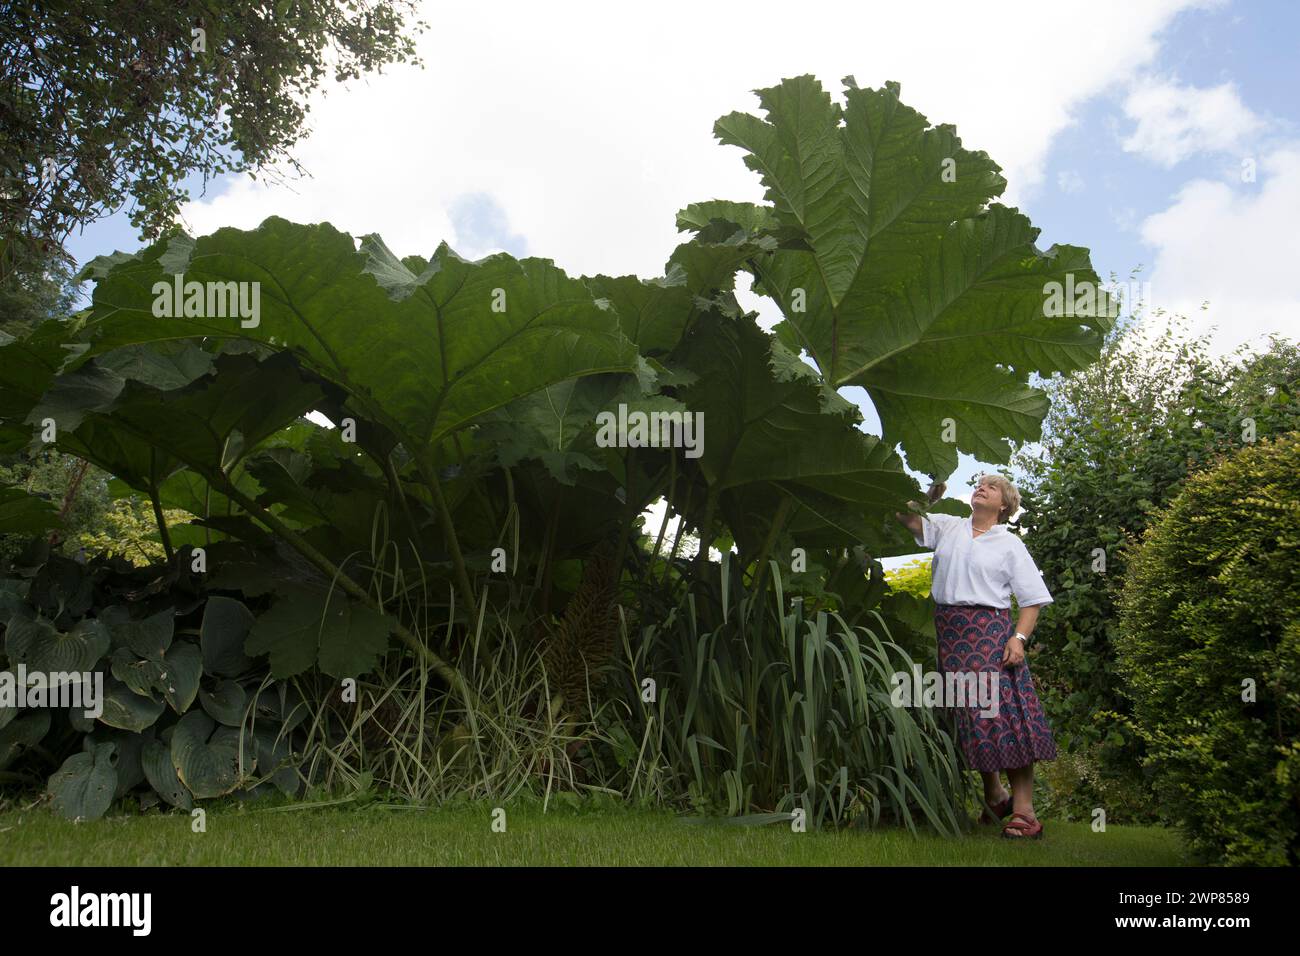 07/08/16  Jenny Phillips, prunes the giant gunnera  plant.   'This is probably the best year ever for our giant gunnera plant,' said gardener Jenny Ph Stock Photo